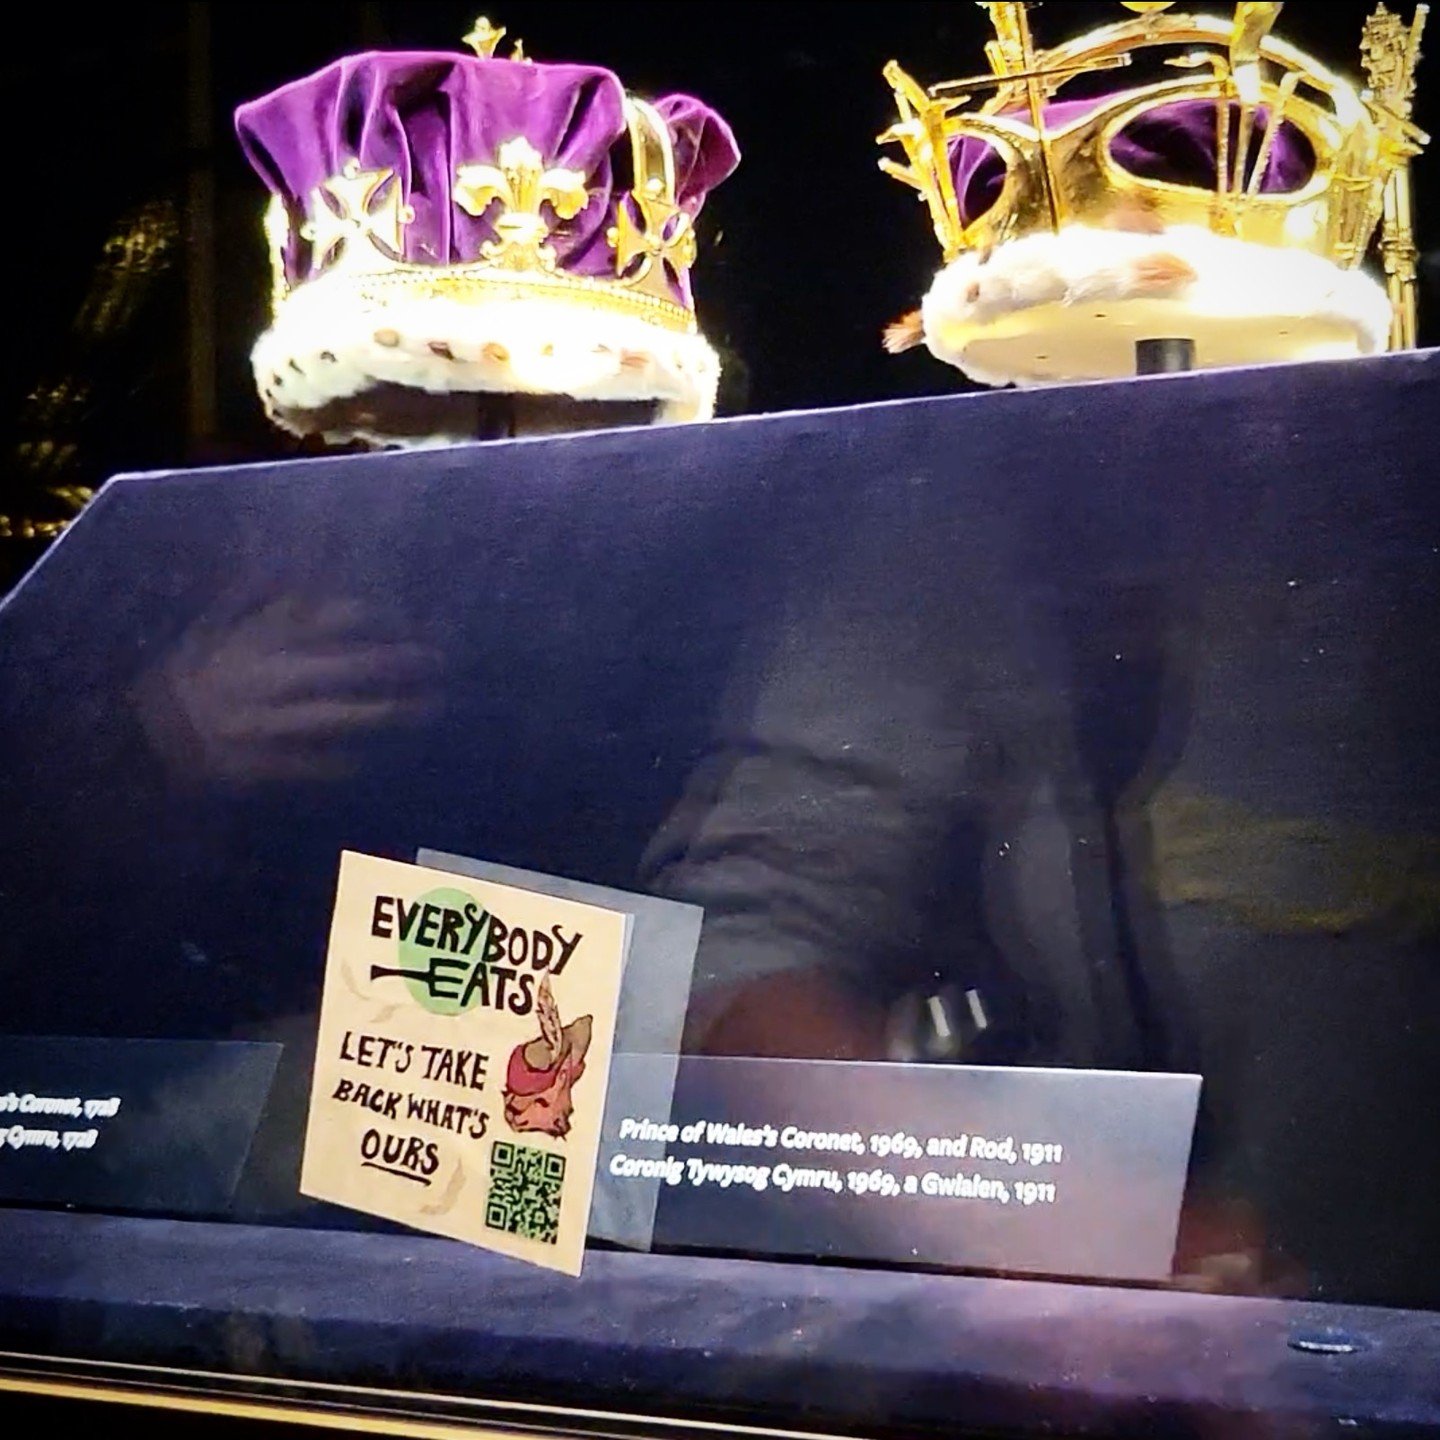 You know the Crown Jewels? (stop snickering). I mean the actual Crown Jewels. Did ya know they are owned by the nation. The one with 4 million children suffering from food poverty? Mad world innit? Well today we stickered the Crown Jewels! And we did